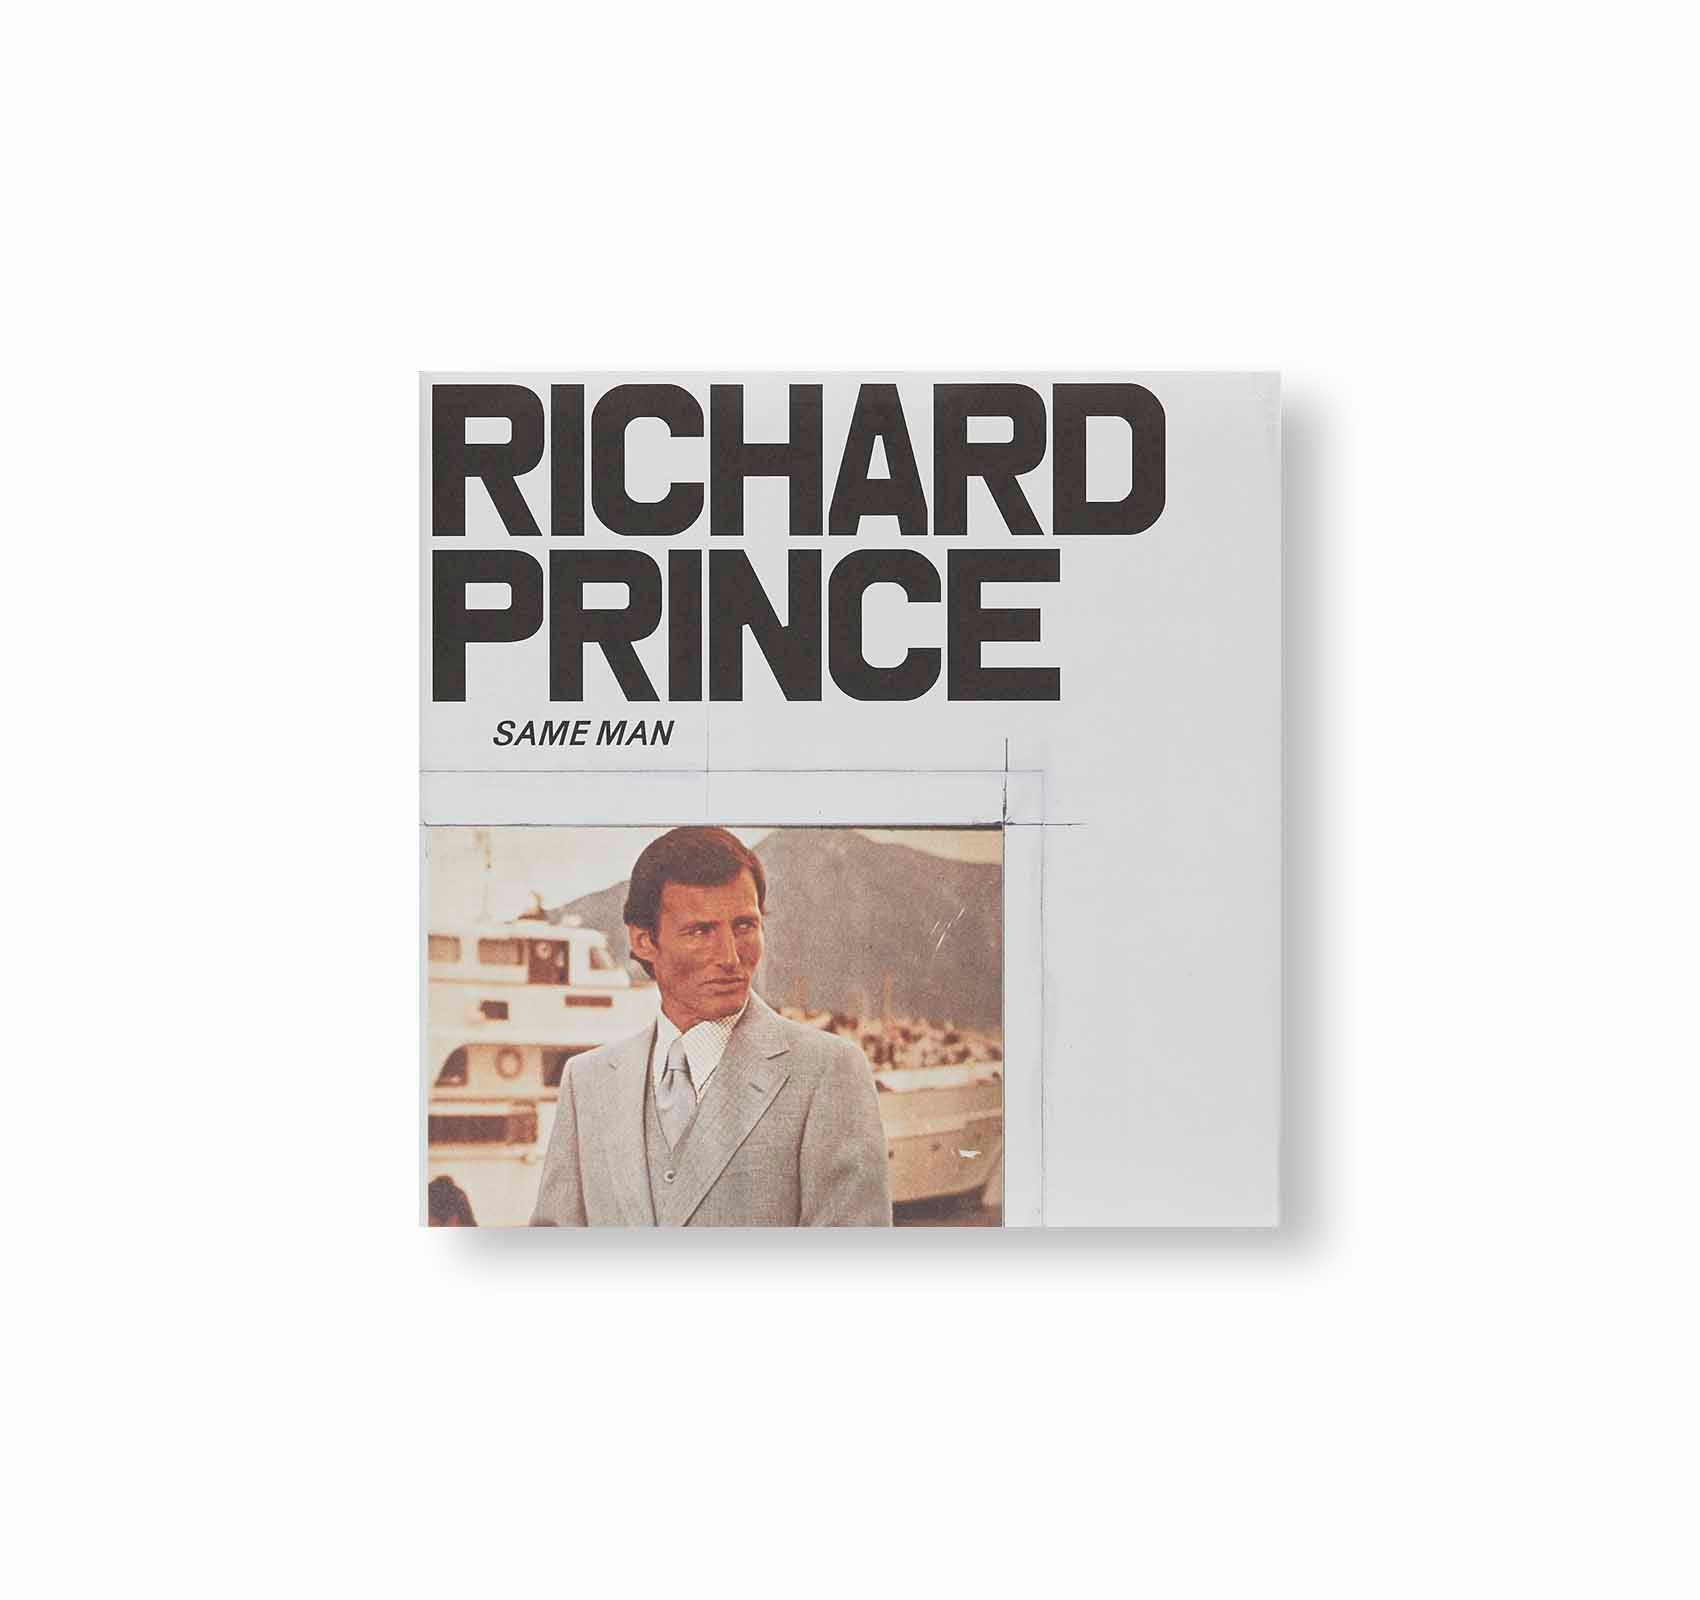 SAME MAN by Richard Prince [SPECIAL EDITION]